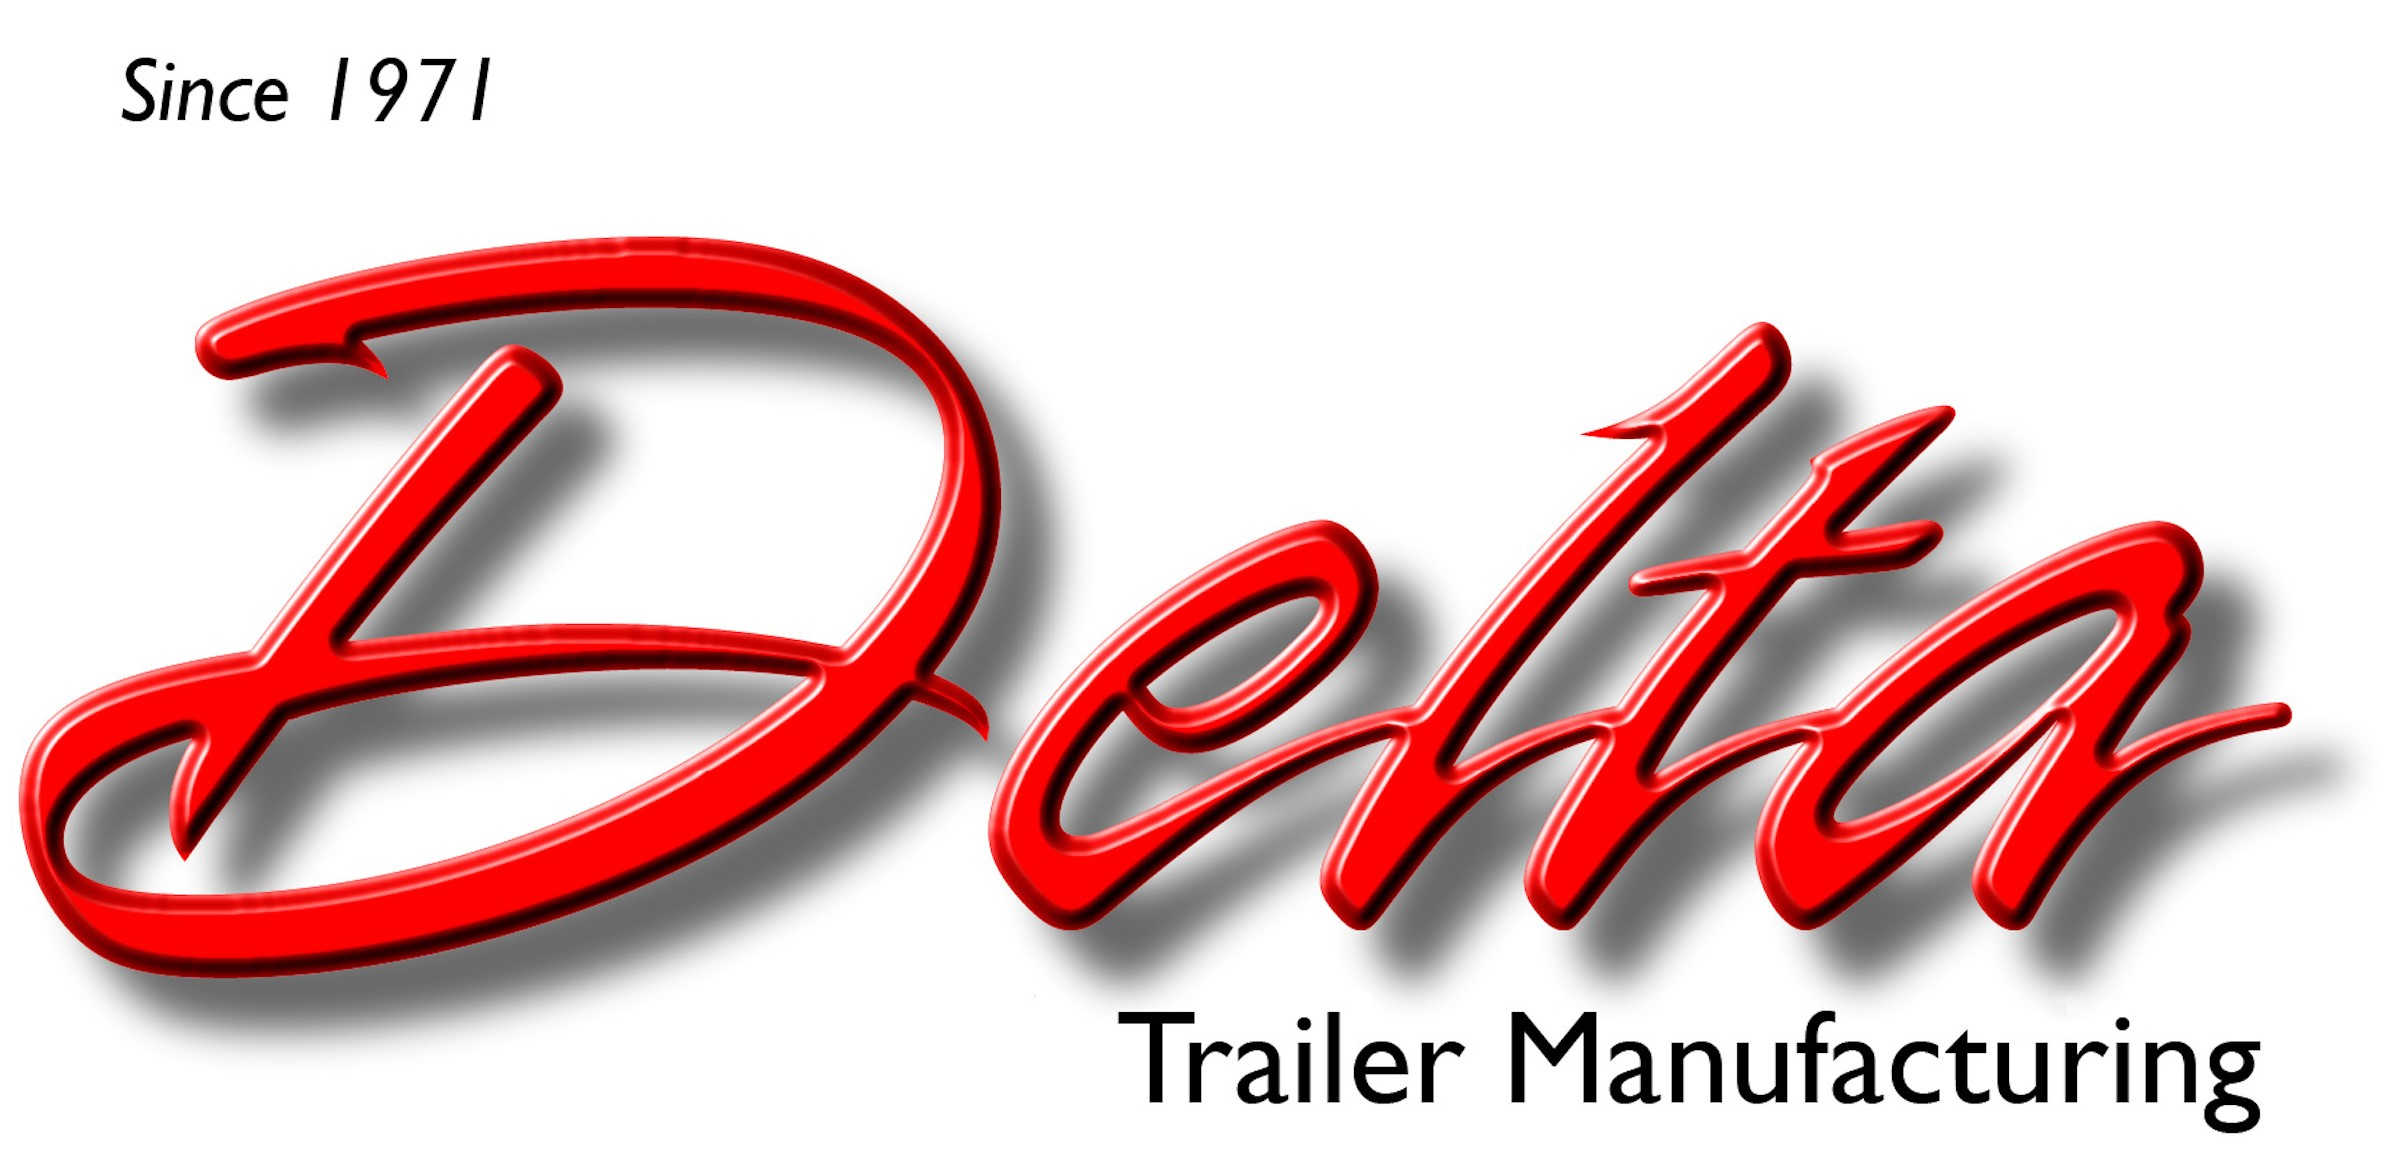 Delta Trailers: Celebrating 50 Years 1971-2021